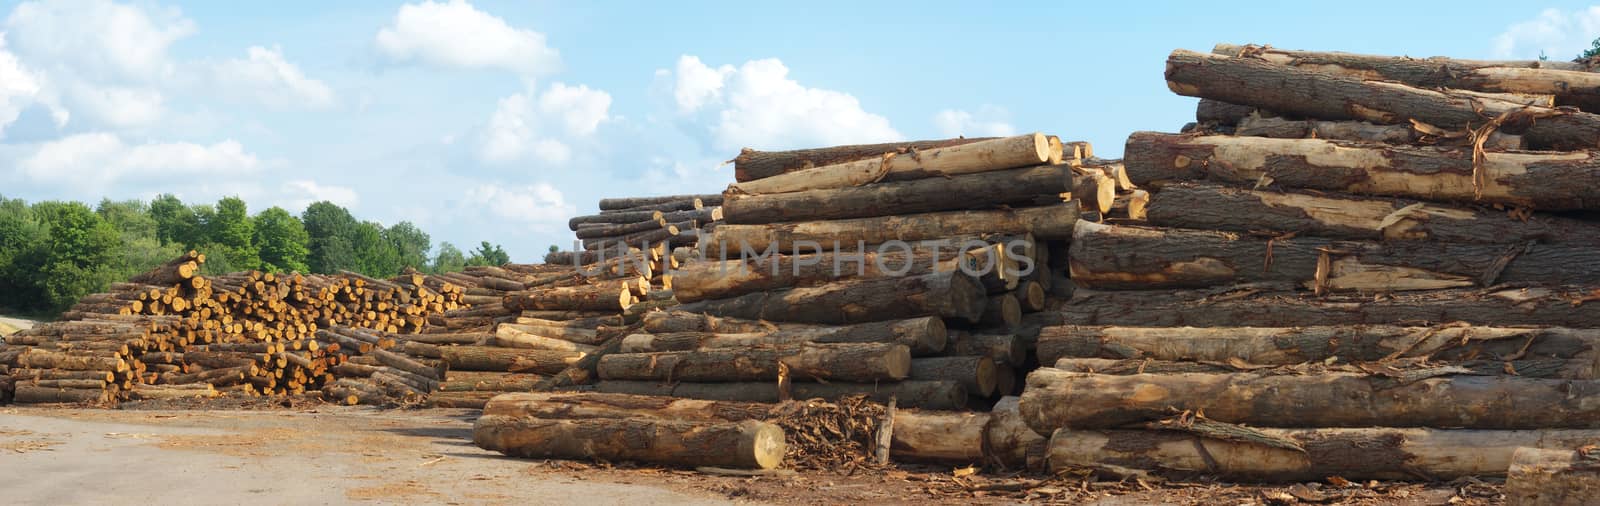 sawmill yard woodpile logs, forest industry and construction raw material